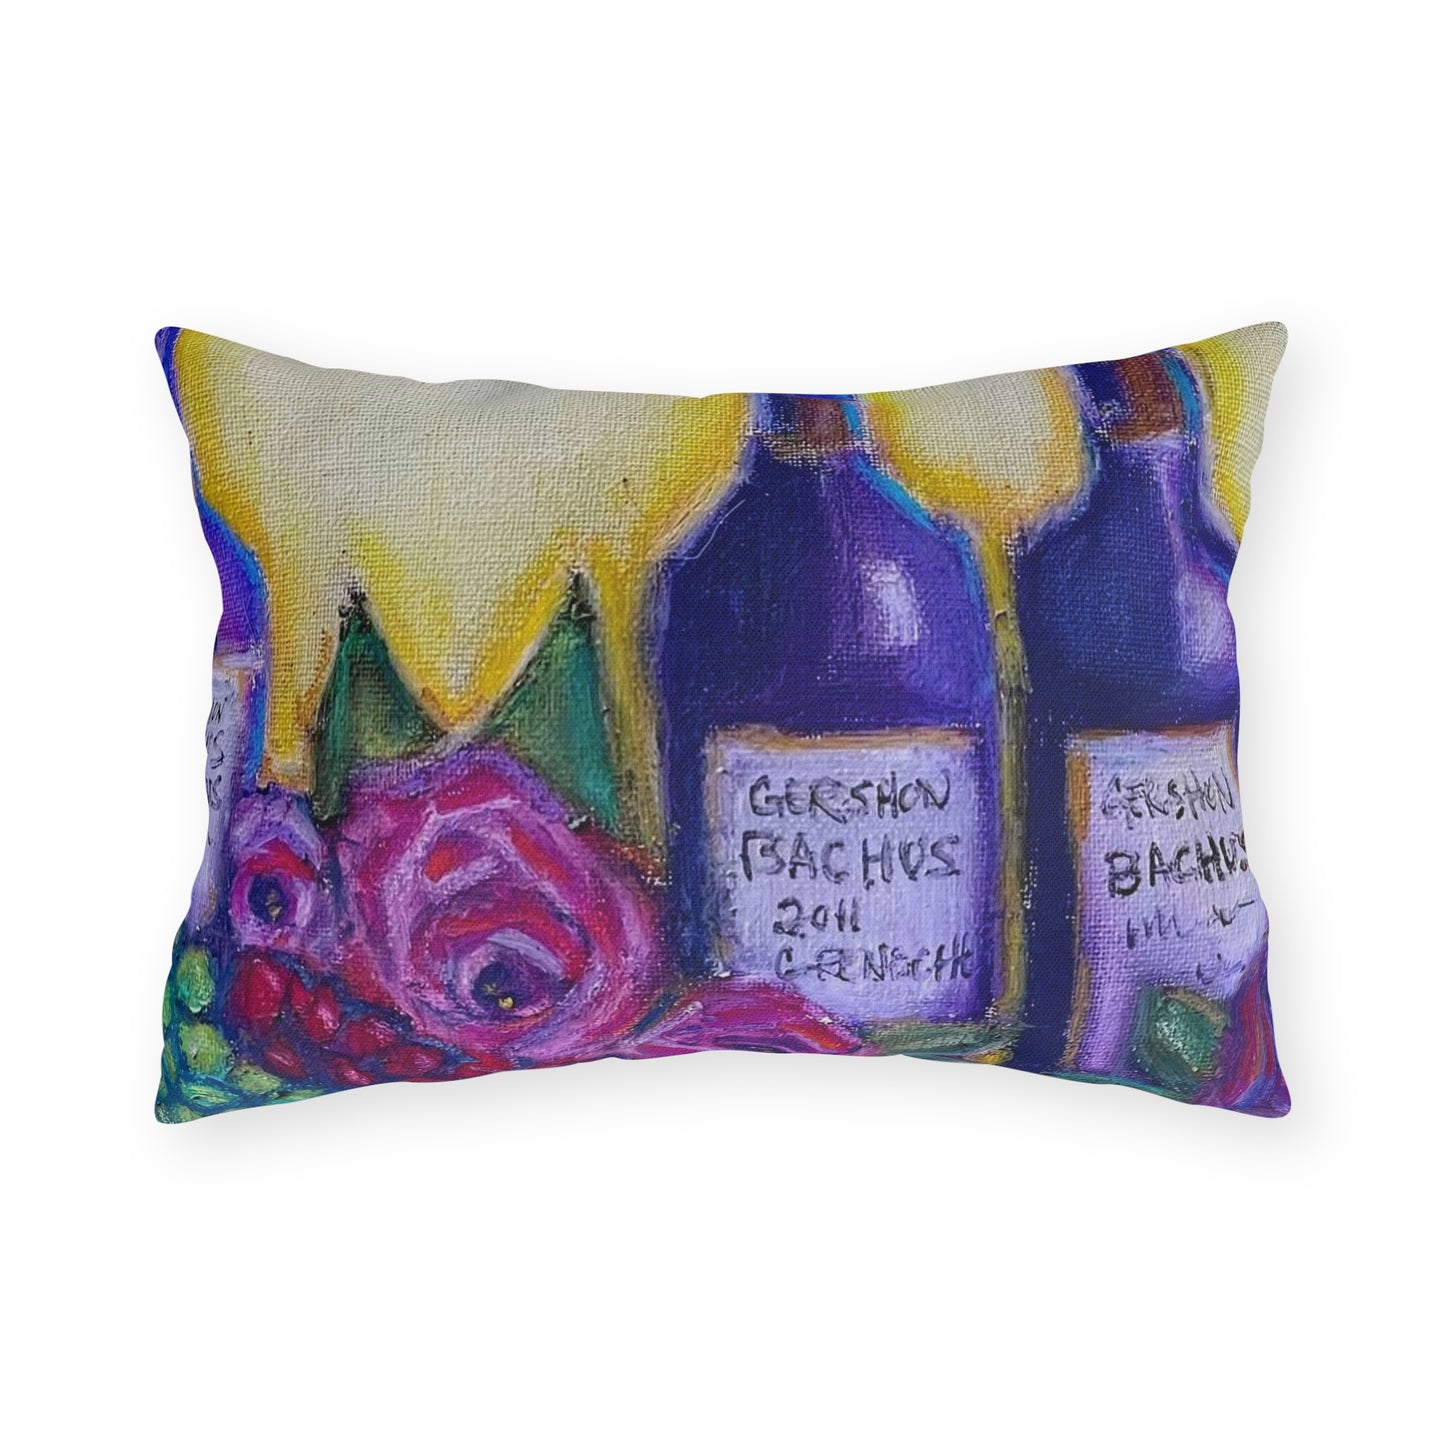 GBV Wine and Roses Outdoor Pillows